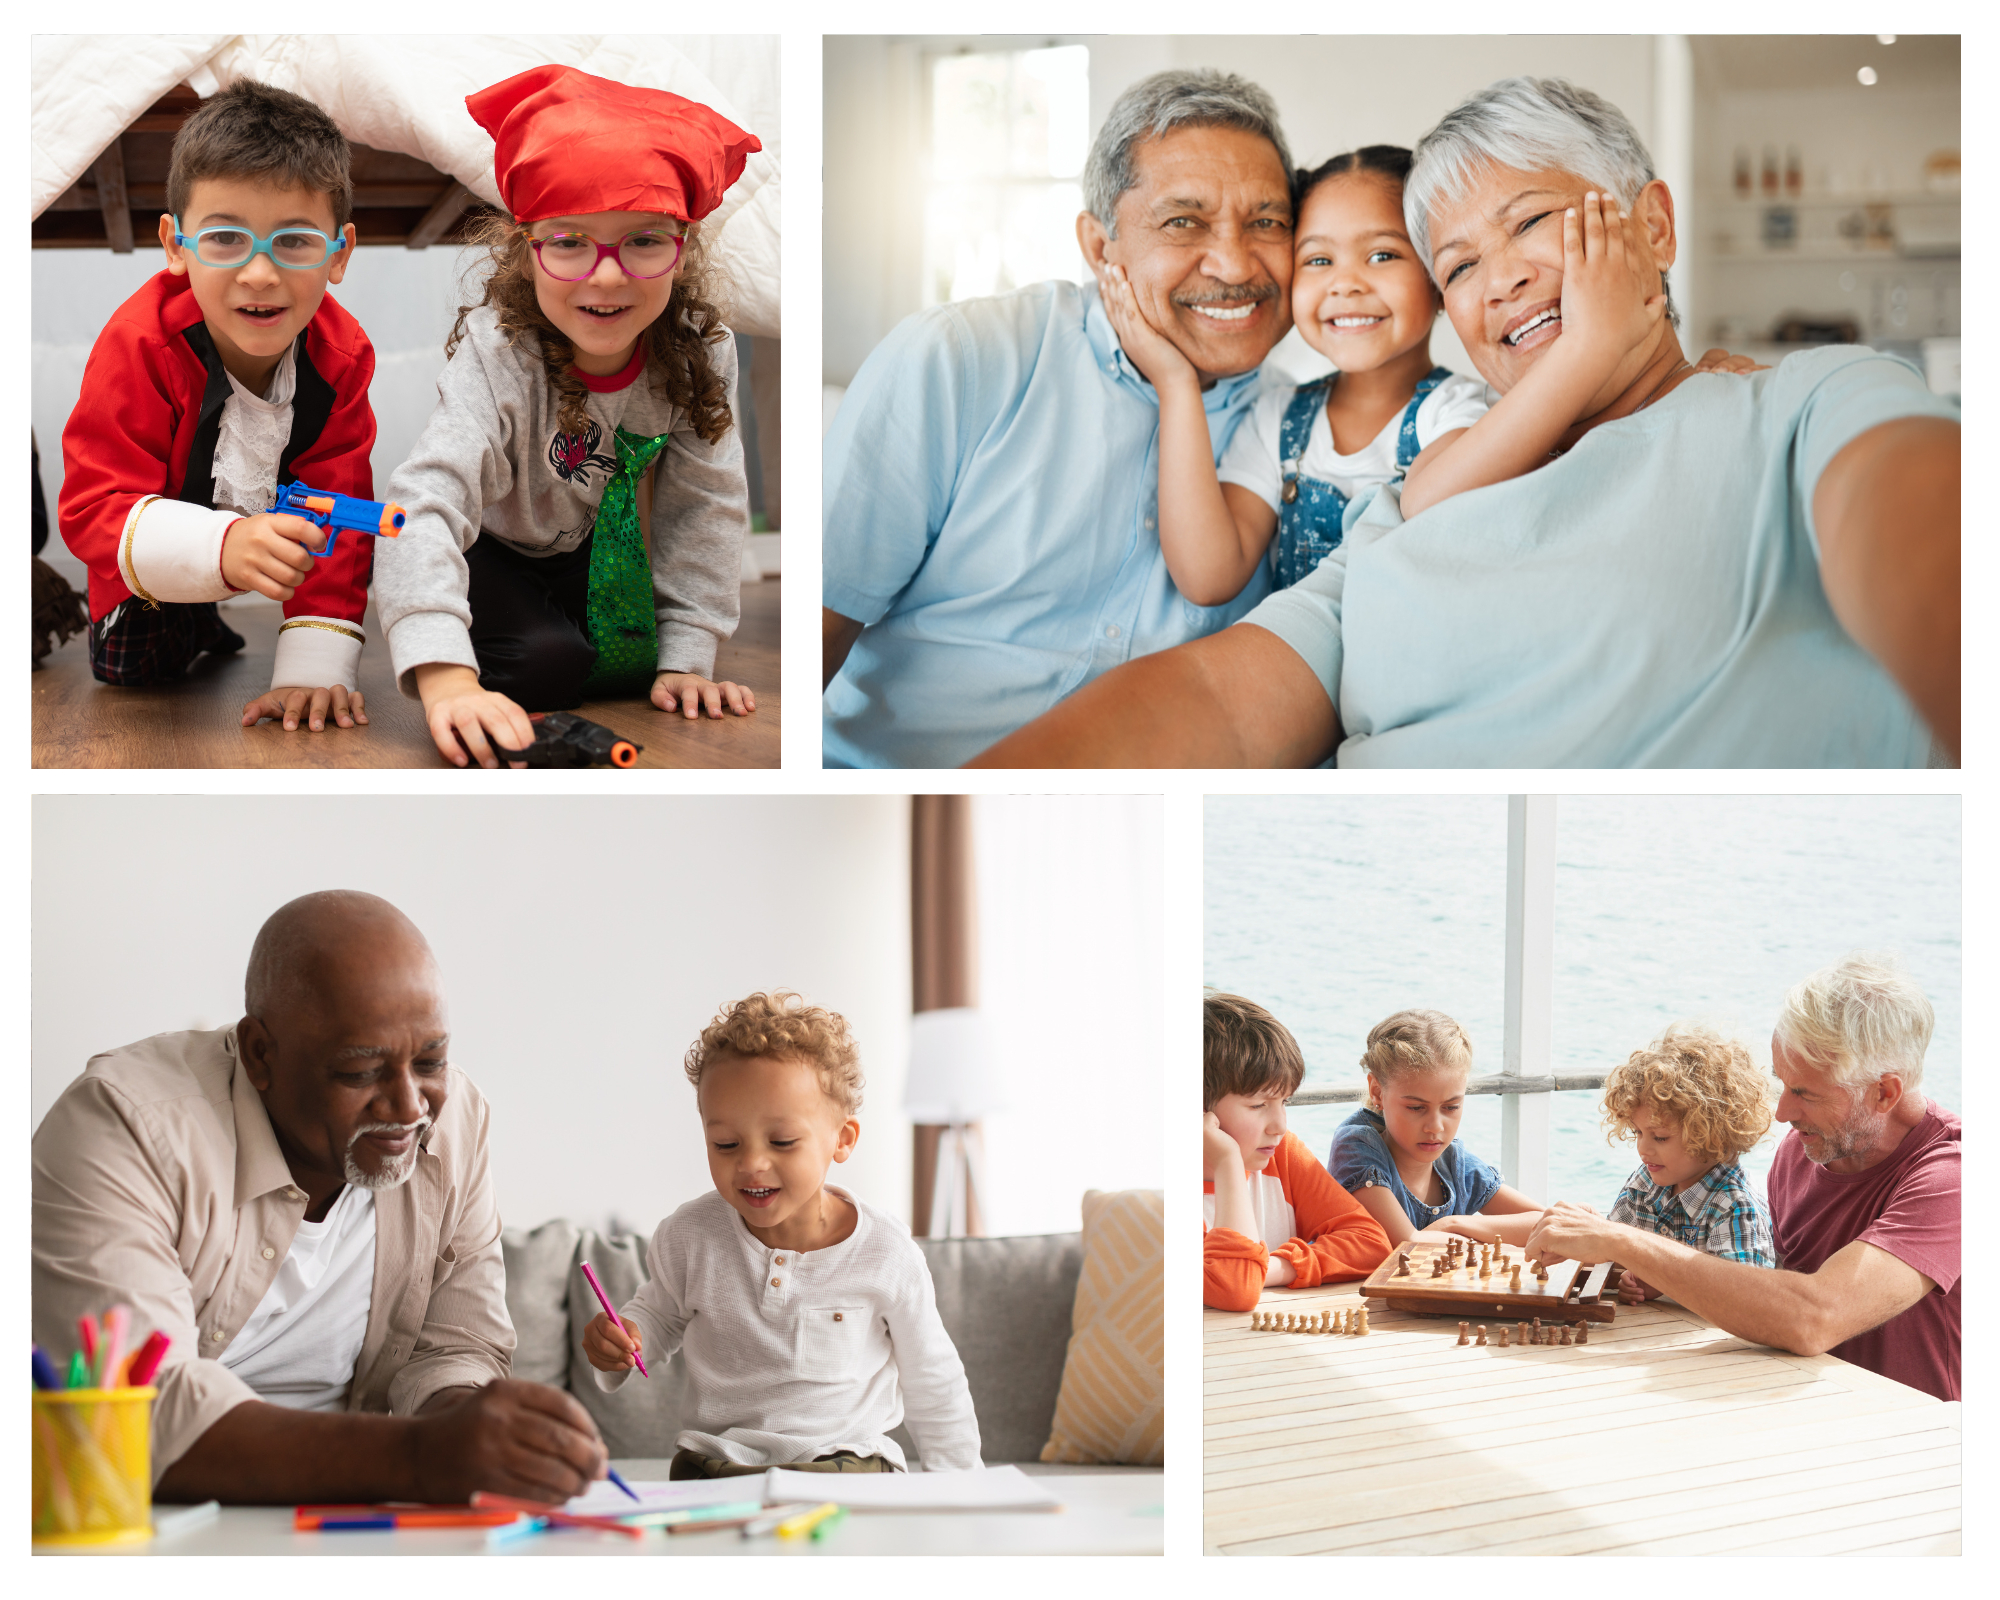 Games to Play with Your Grandchildren